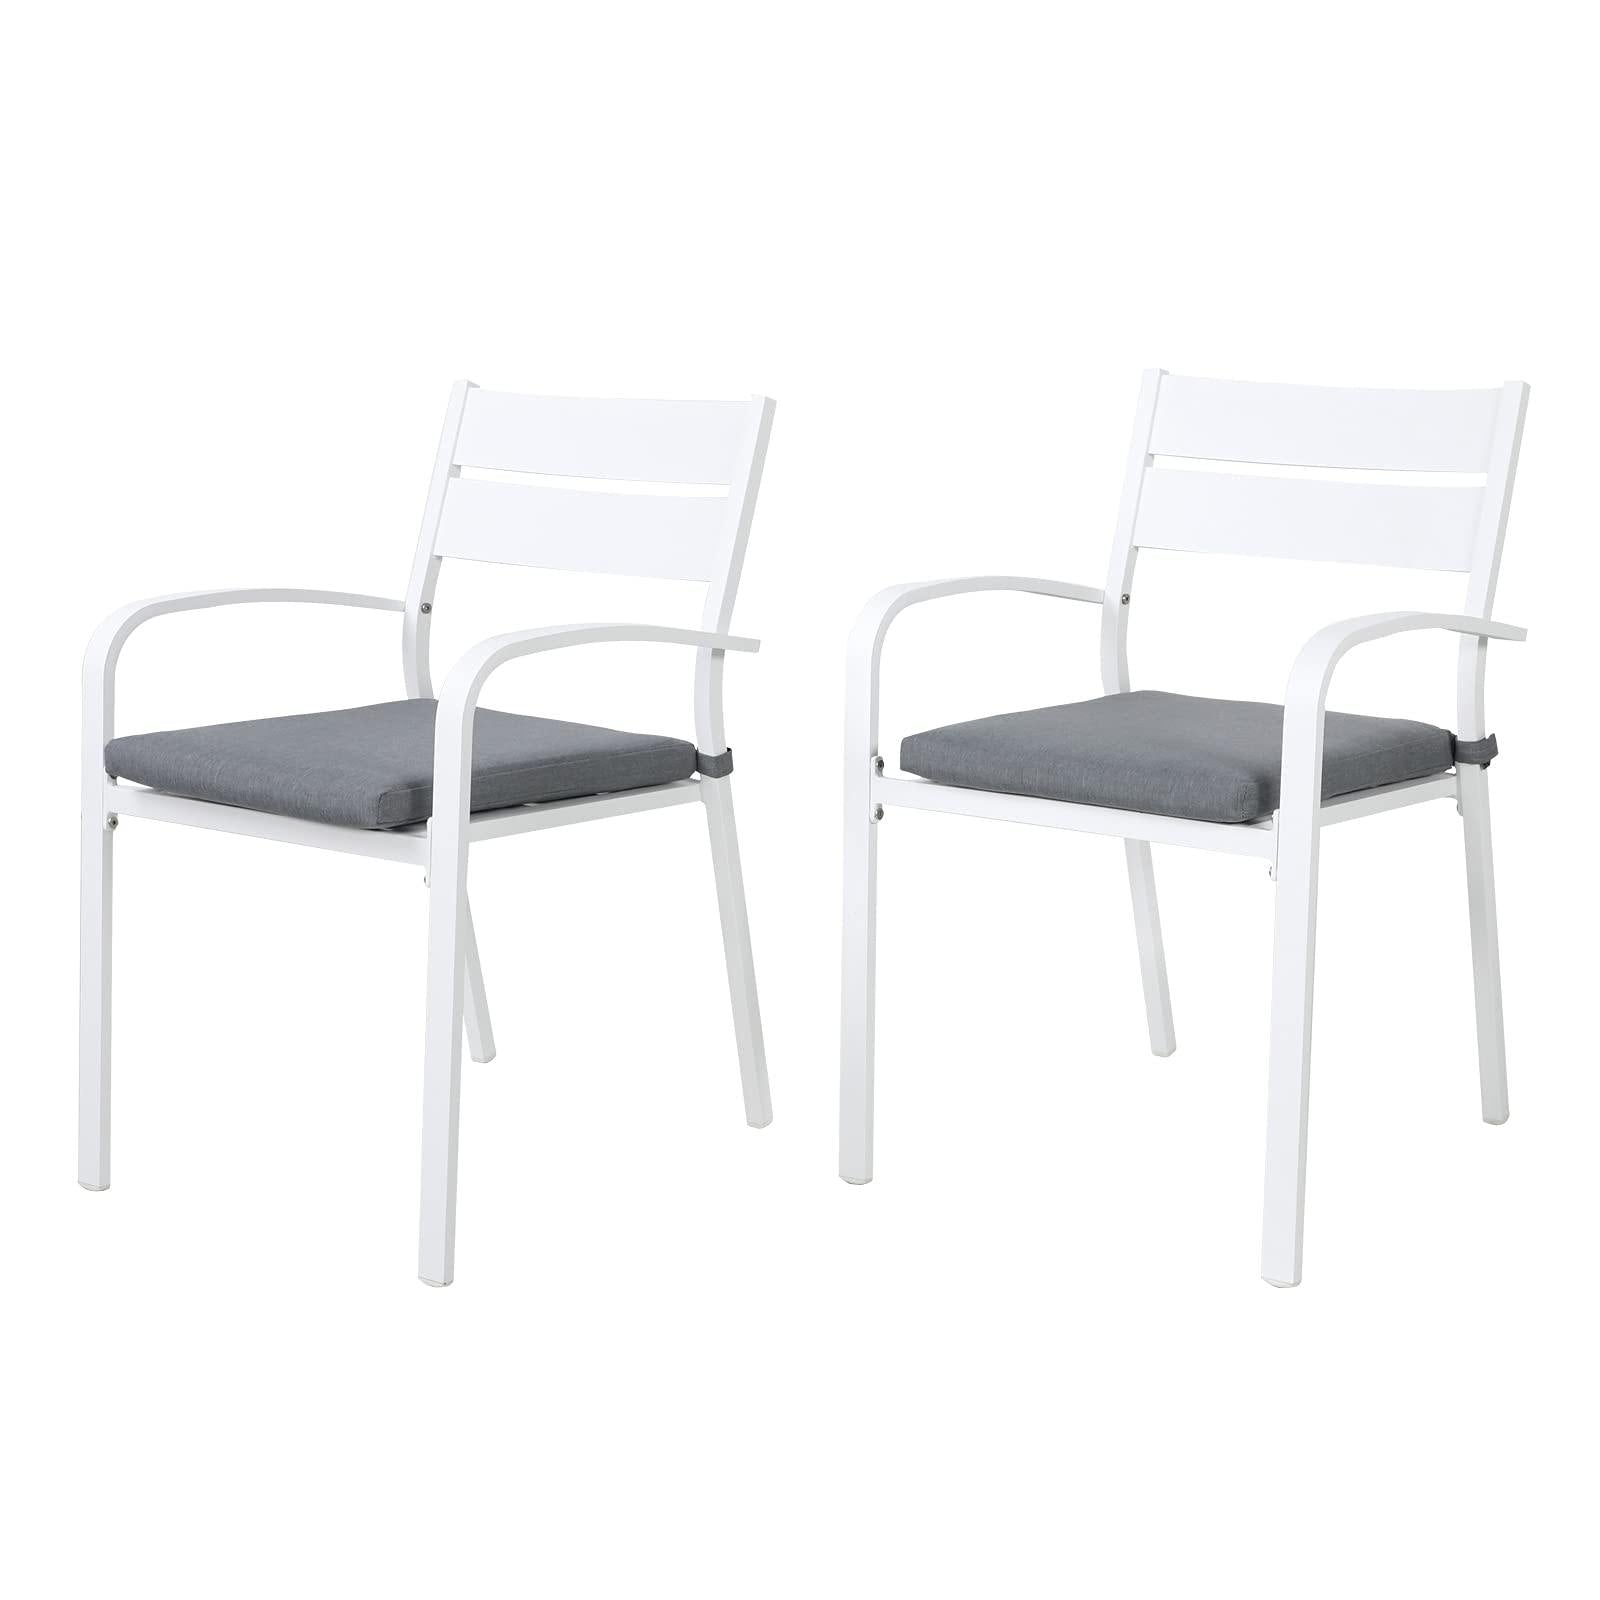 2pcs Patio Dining Chairs with Cushions Aluminum Outdoor Chairs | Orange-Casual